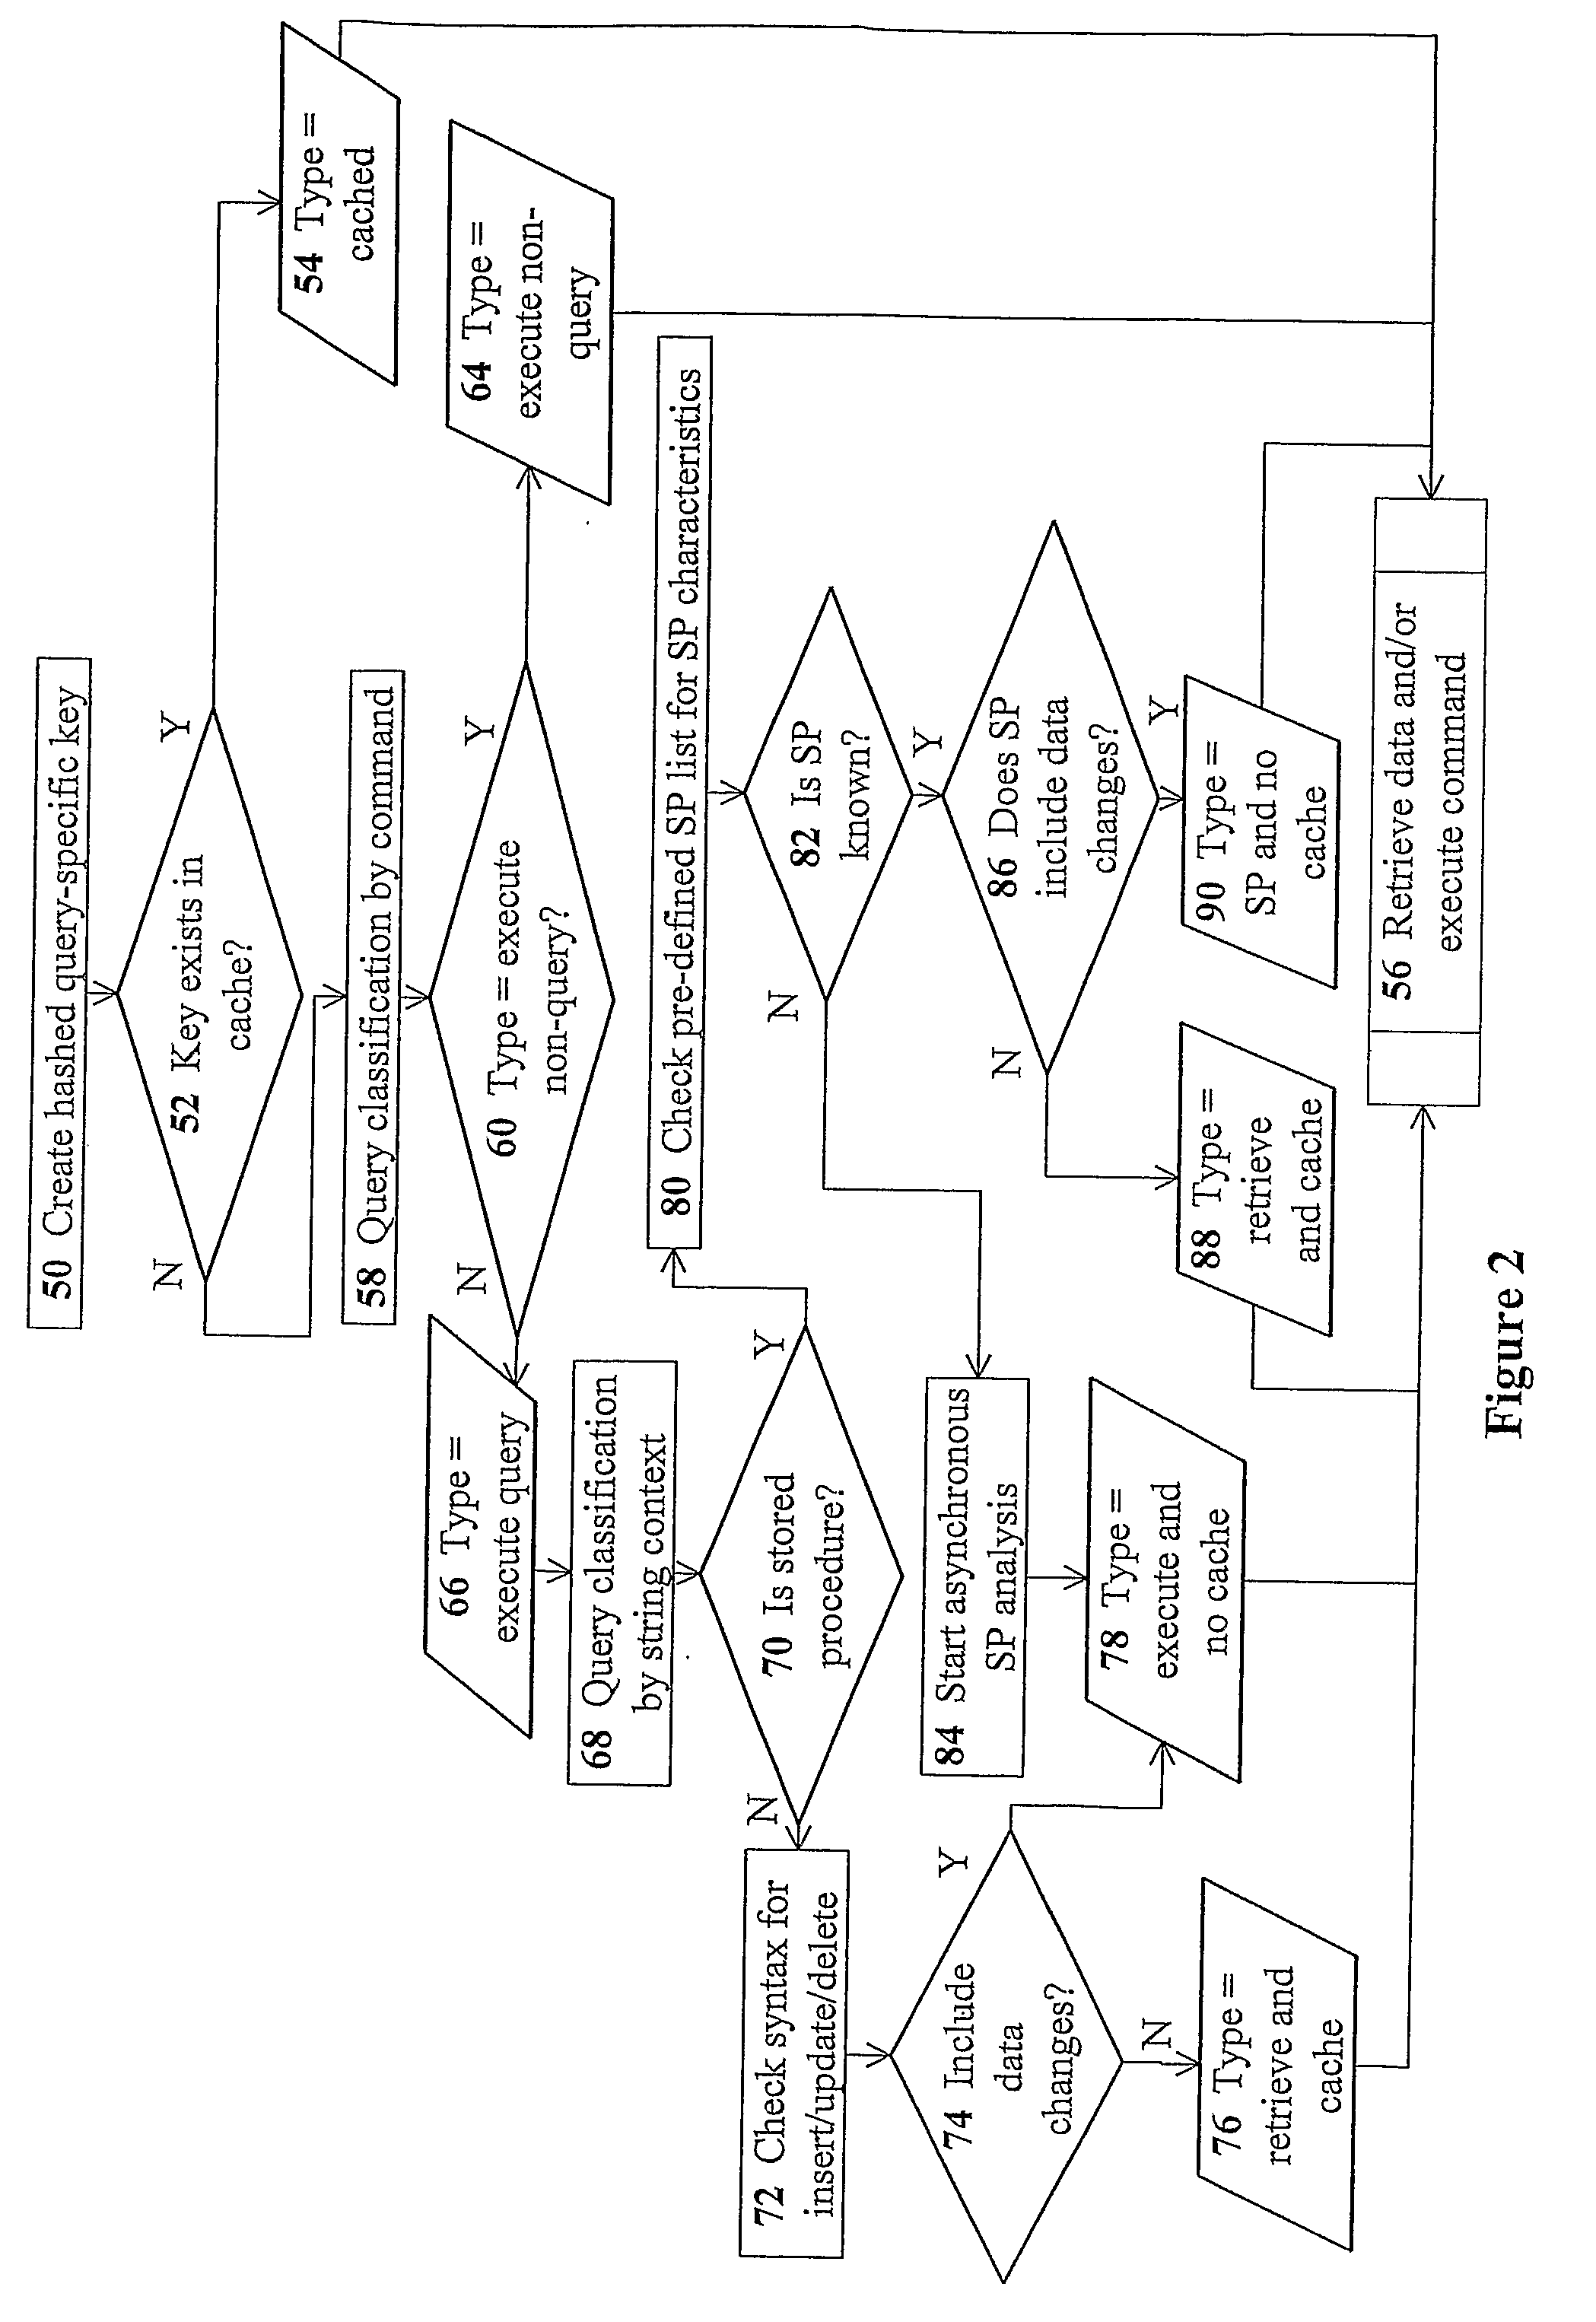 Devices for providing distributable middleware data proxy between application servers and database servers